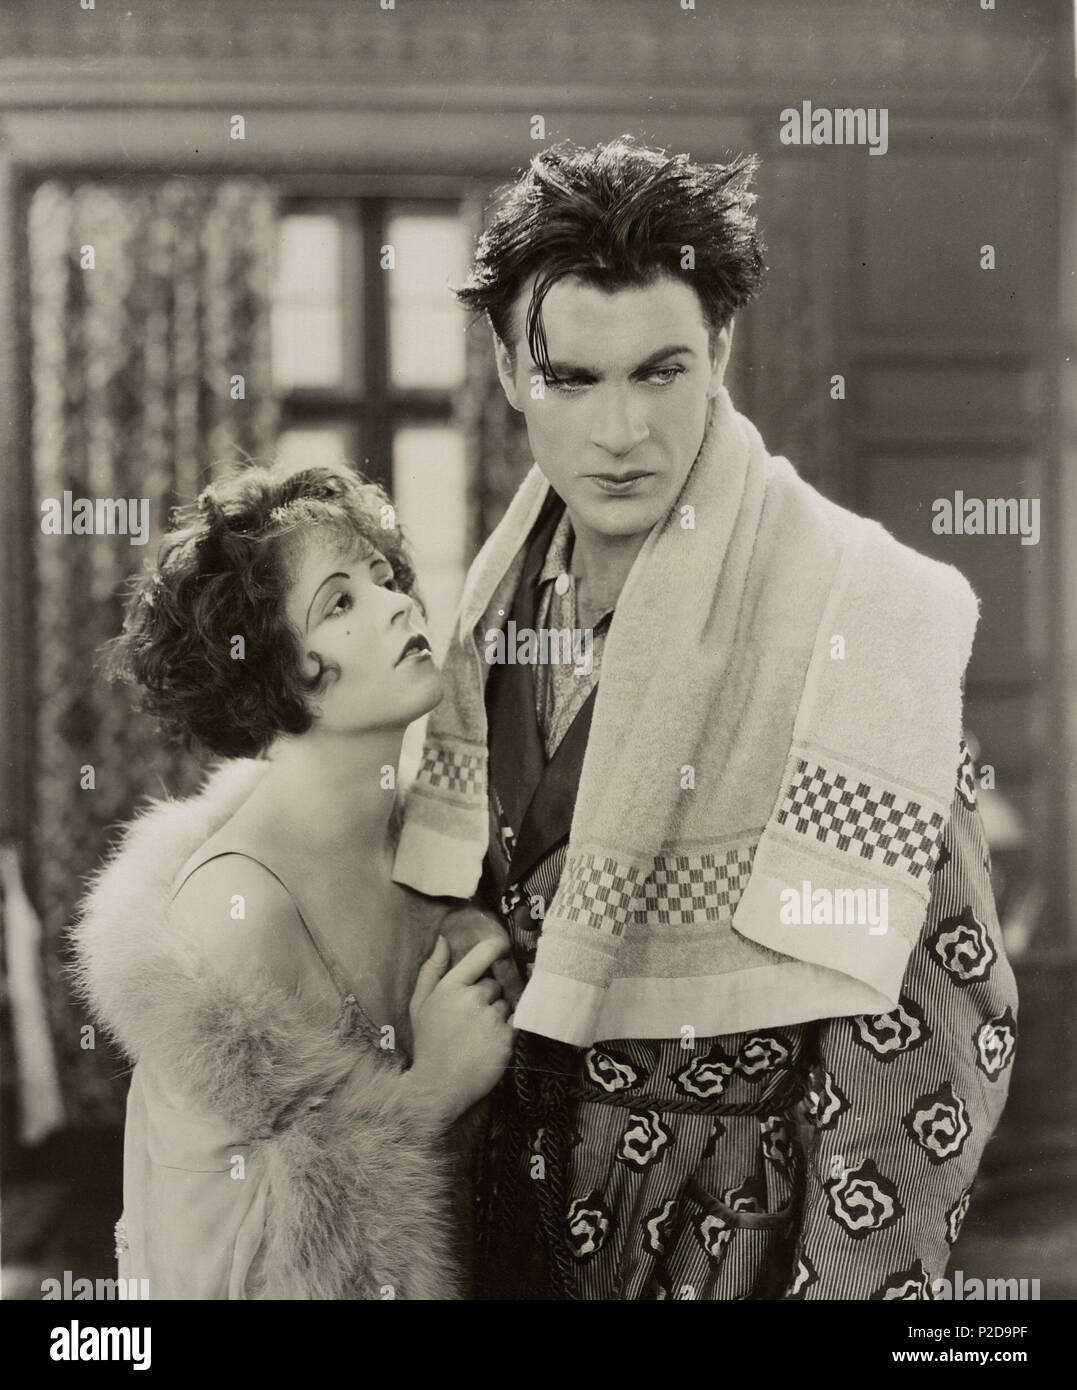 Englisch: Kinder der Scheidung (Film) 1927. Frank Lloyd, Direktor. L-R:  Clara Bow, Gary Cooper. Famous-Players - Lasky, Paramount Pictures. 1927.  Famous-Players - Lasky, von größter Bedeutung. Frank Lloyd, Richt. 12 Kinder